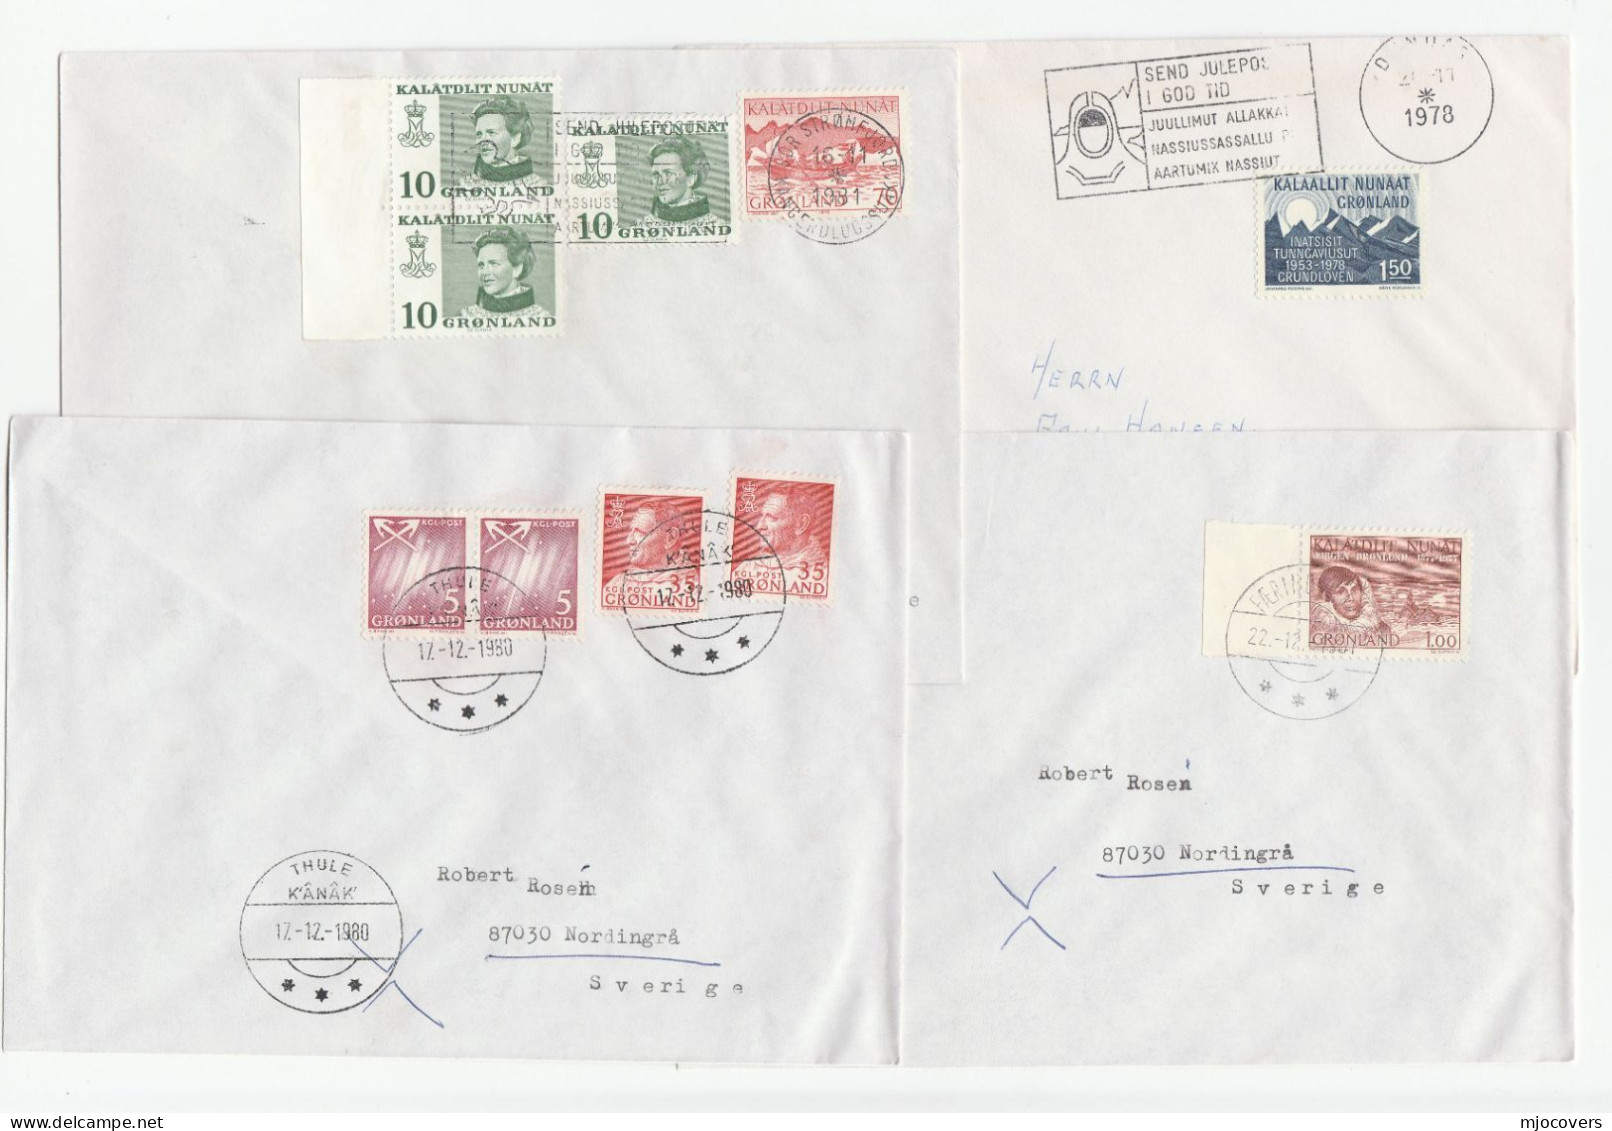 1970s - 1980s 4 GREENLAND COVERS Multi Stamps Cover To Sweden Germany - Covers & Documents